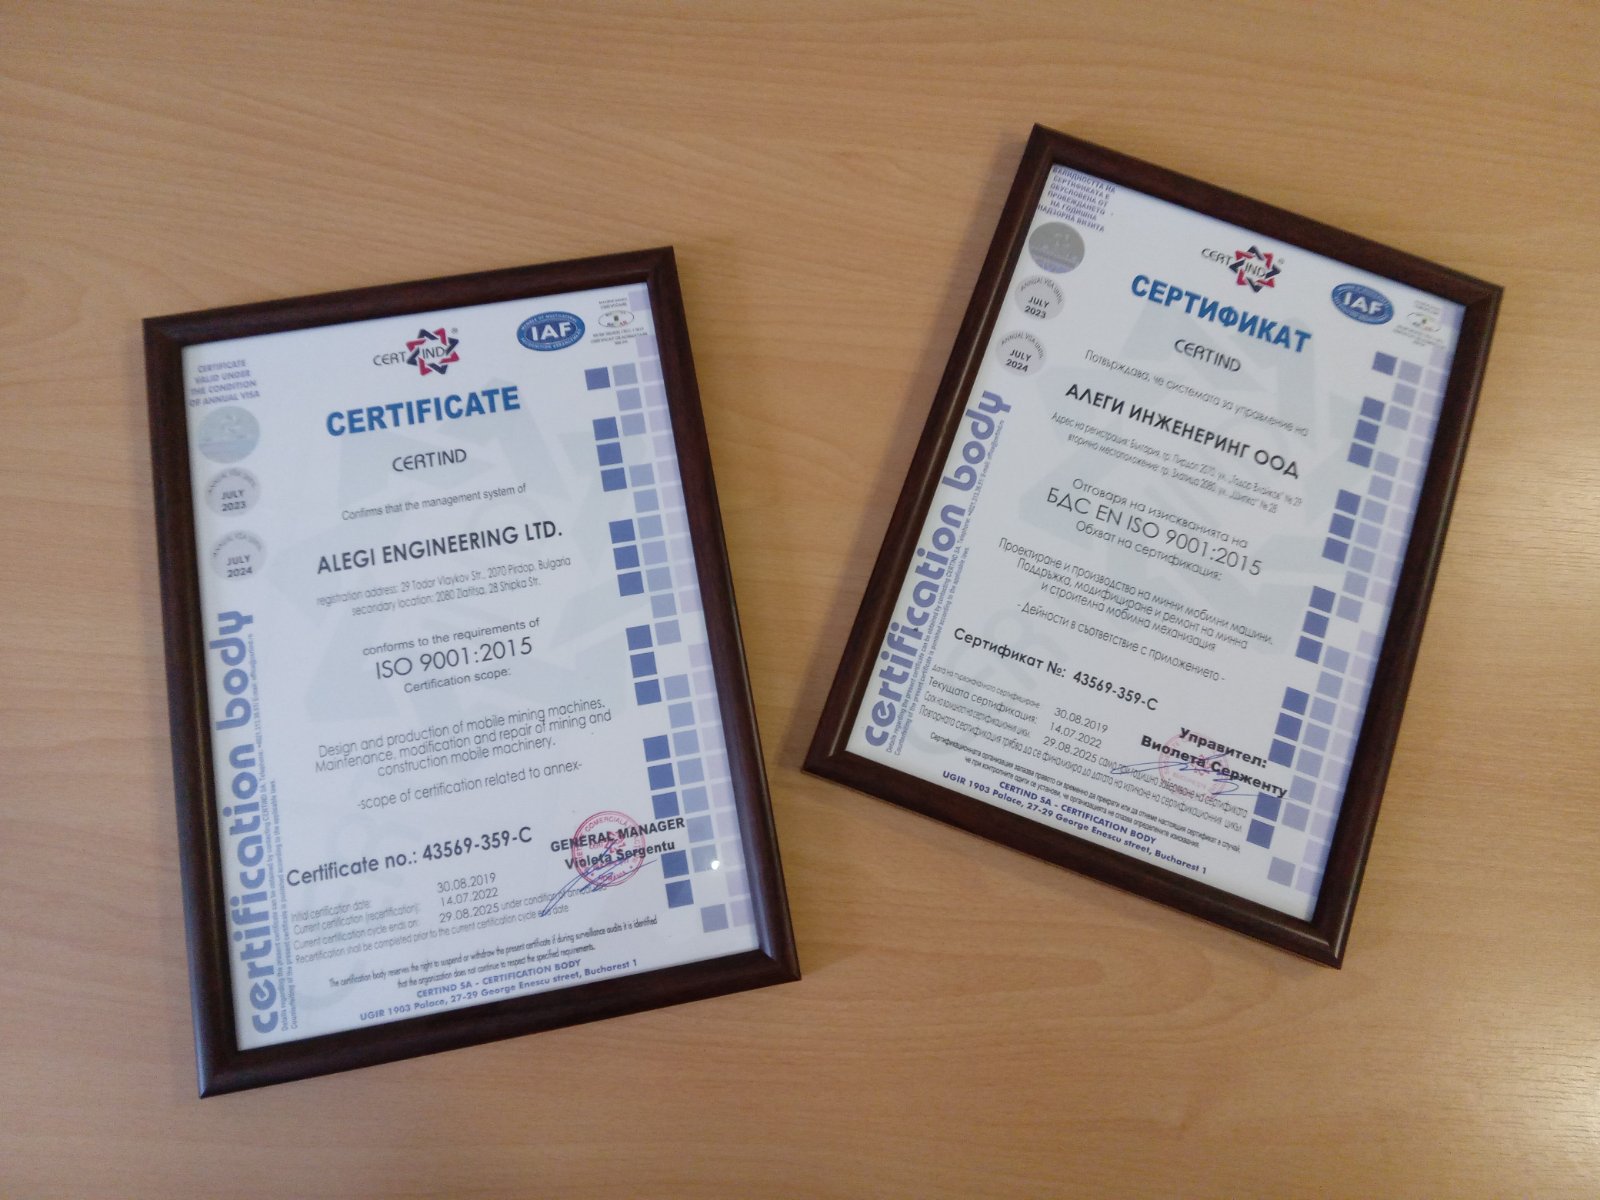 Alegi Engineering has expanded its scope according to ISO 9001:2015